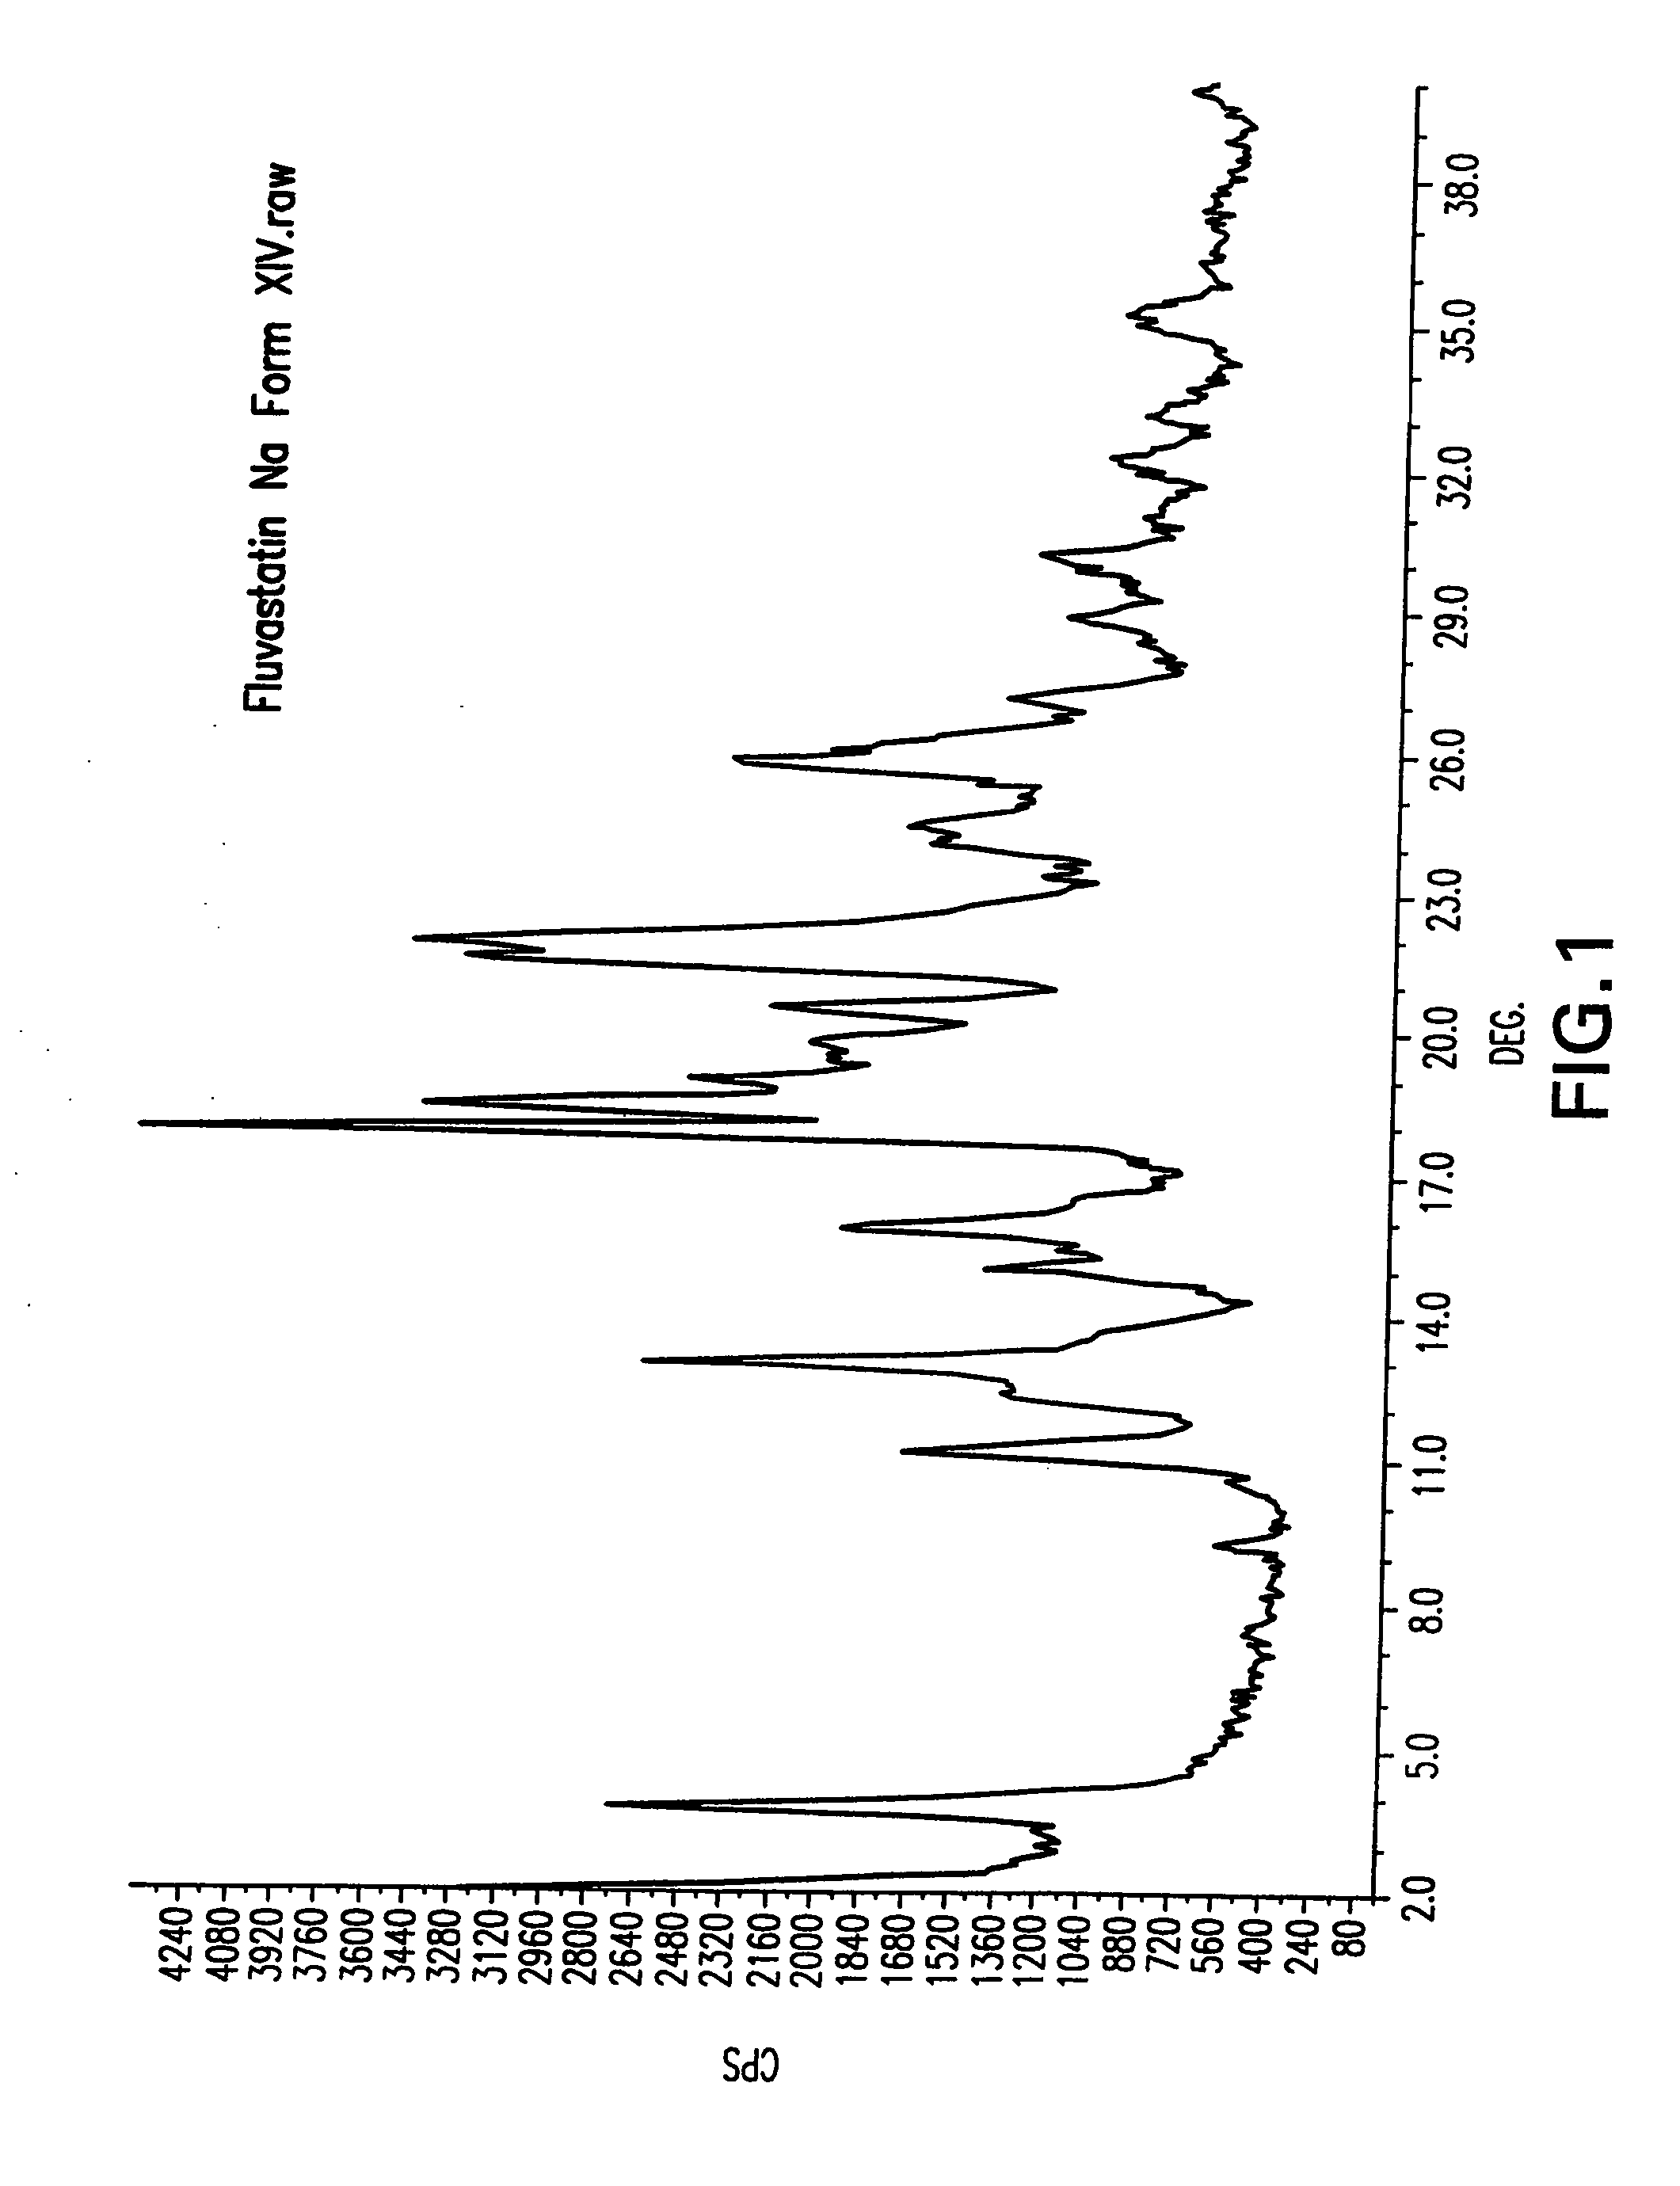 Process for the preparation of fluvastatin sodium crystal from XIV